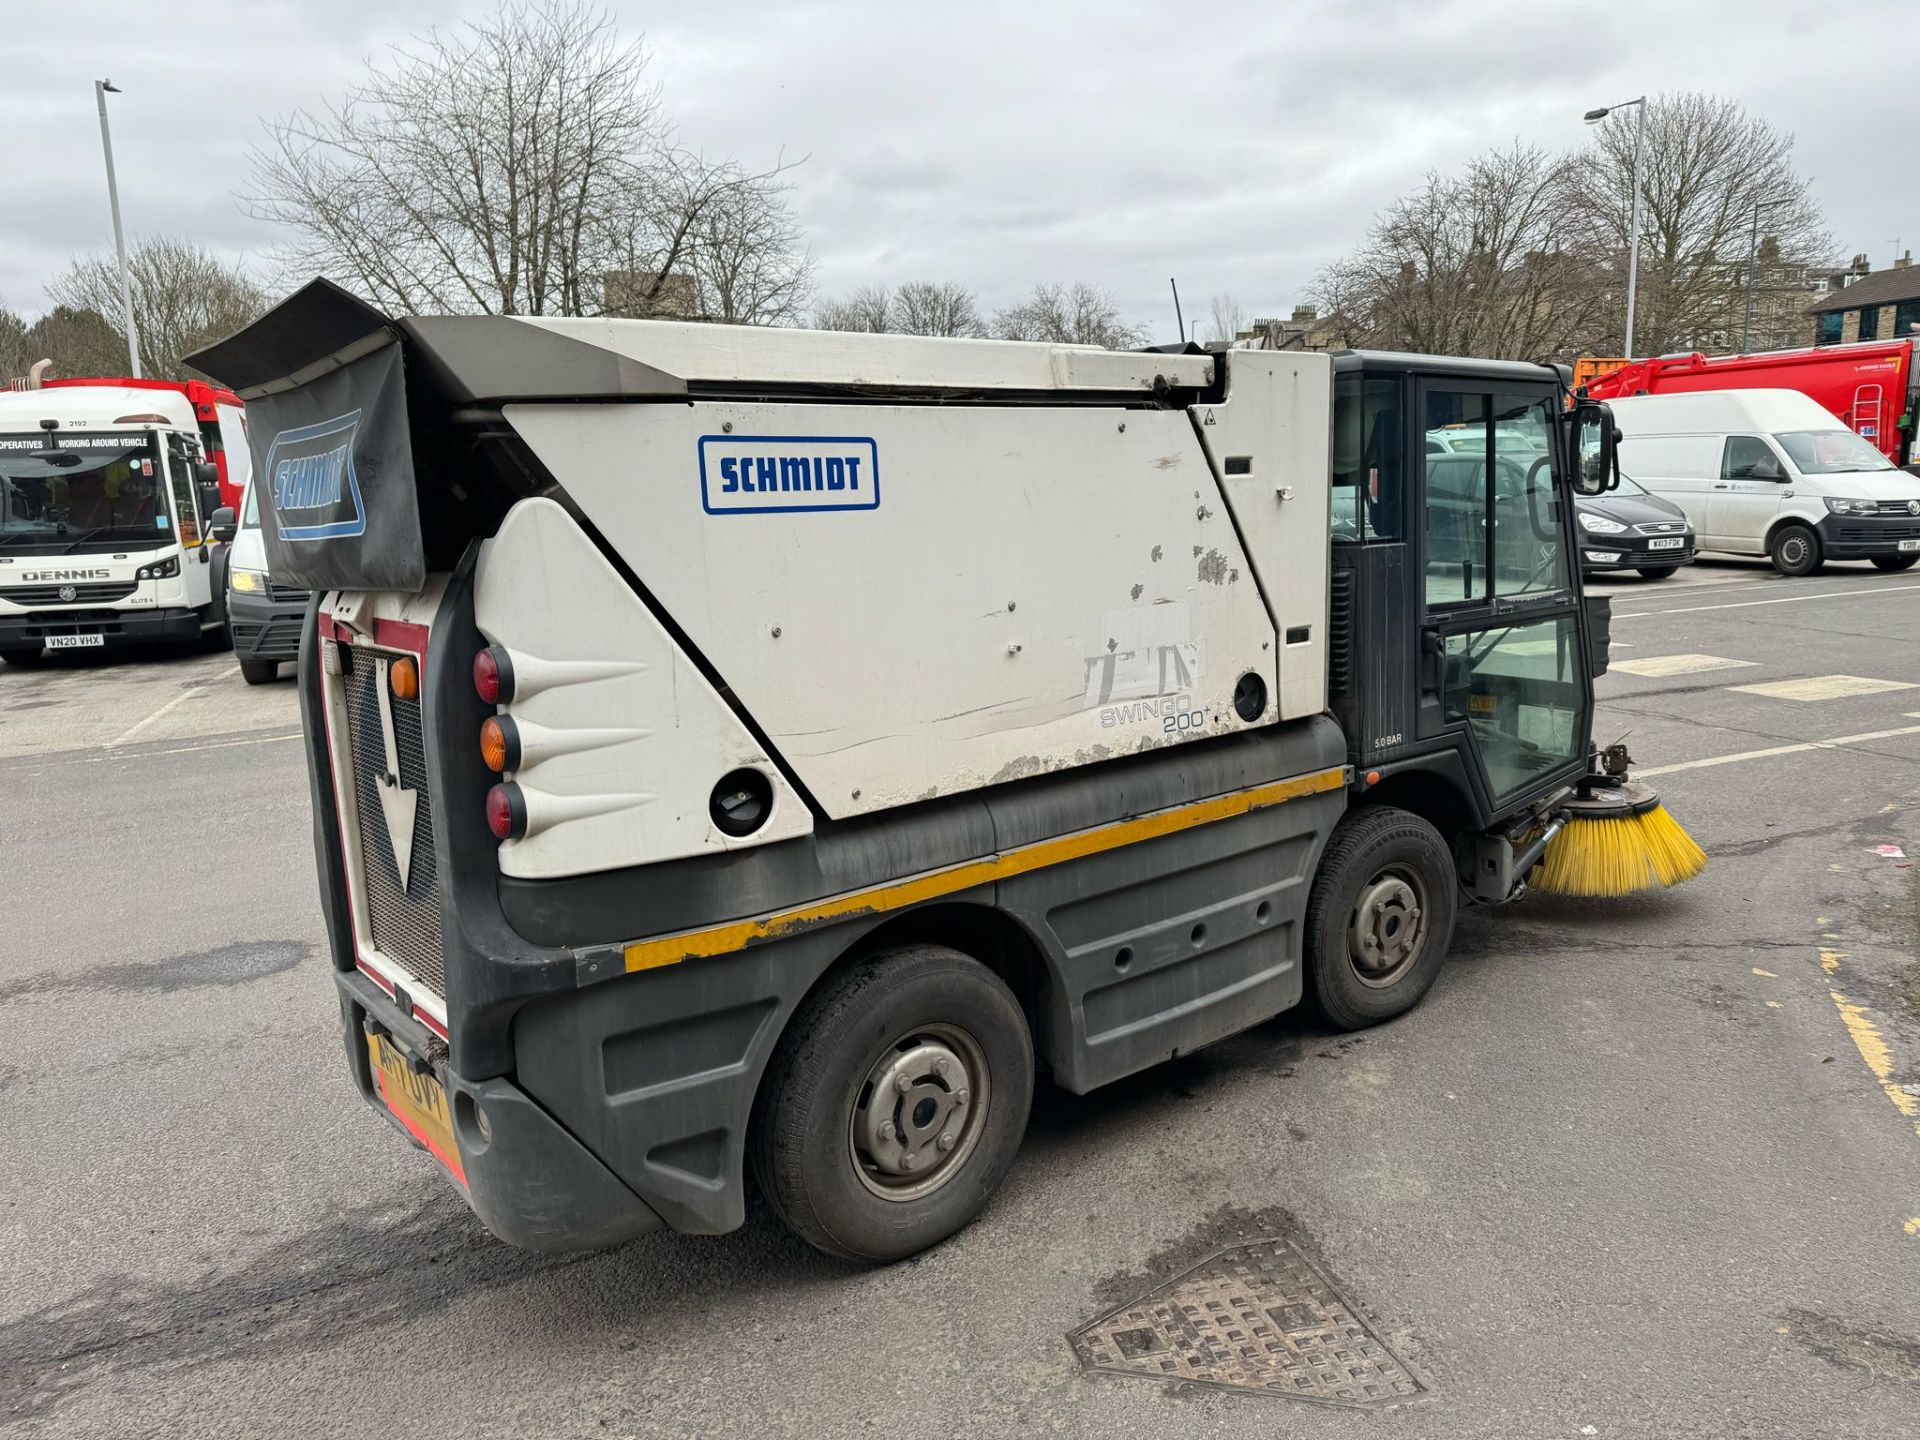 2017, SCHMIDT - Compact 200 Road Sweeper (Ex-Council fleet owned and maintained) - Image 4 of 32